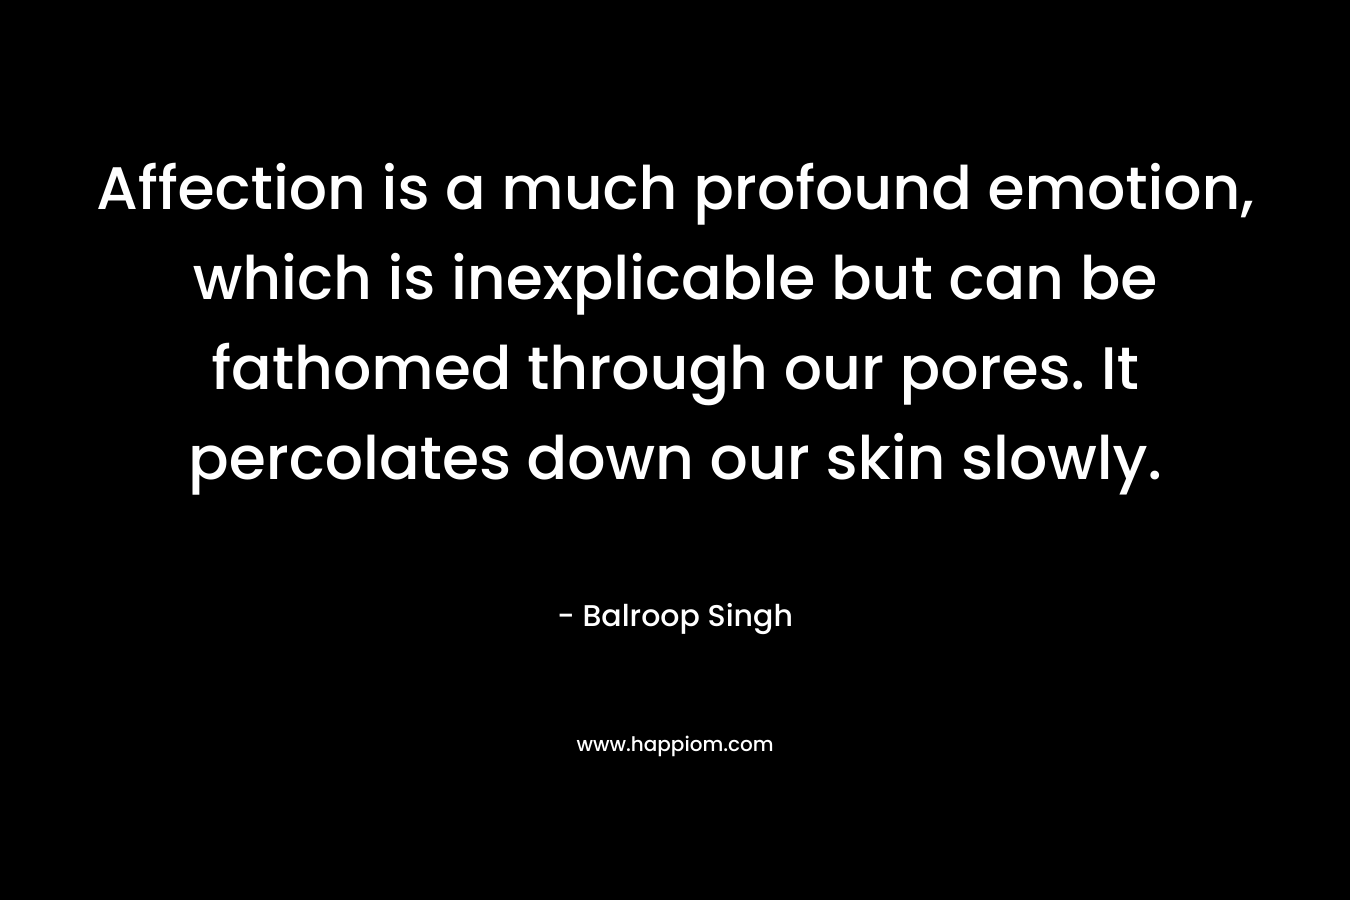 Affection is a much profound emotion, which is inexplicable but can be fathomed through our pores. It percolates down our skin slowly. – Balroop Singh